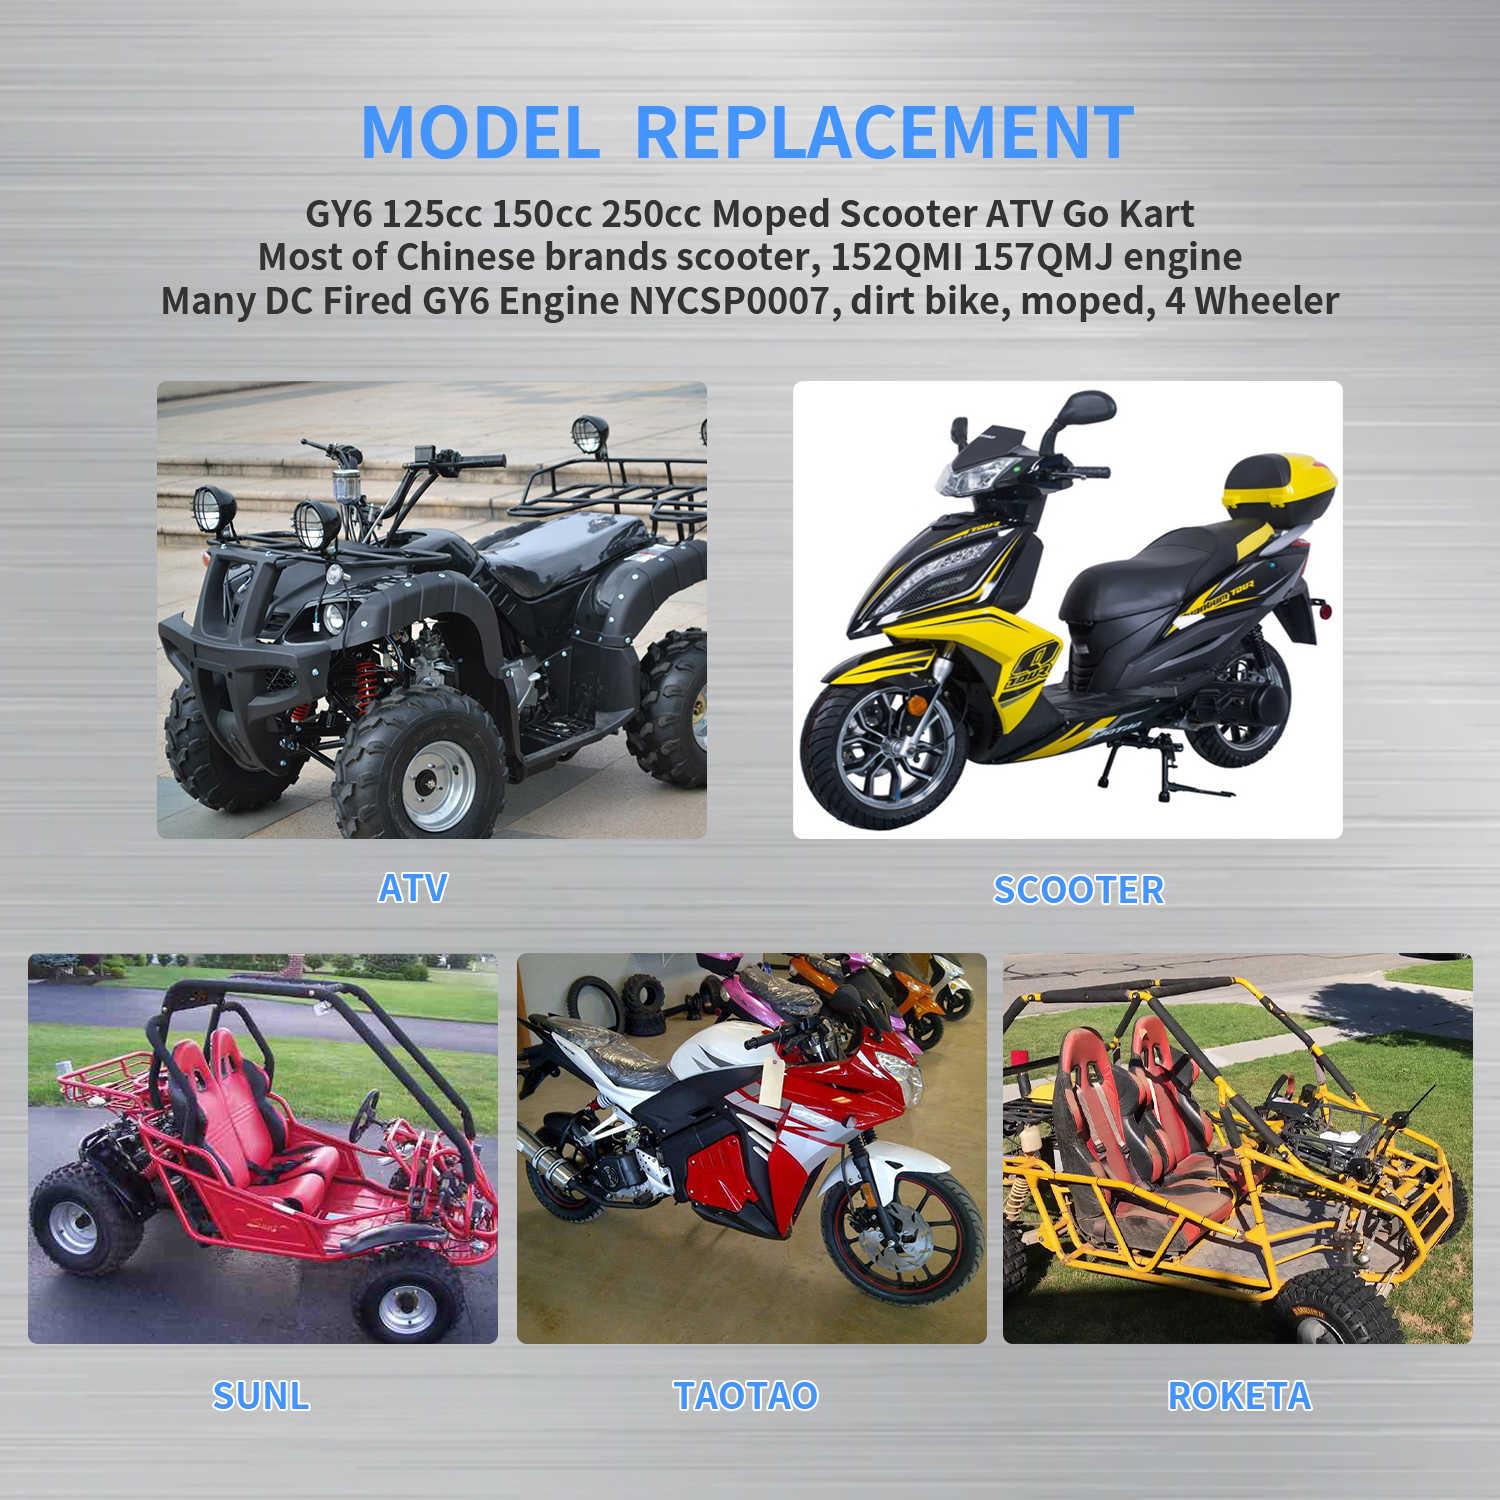 CDI BOX replacement for GY6 125cc 150cc 250cc